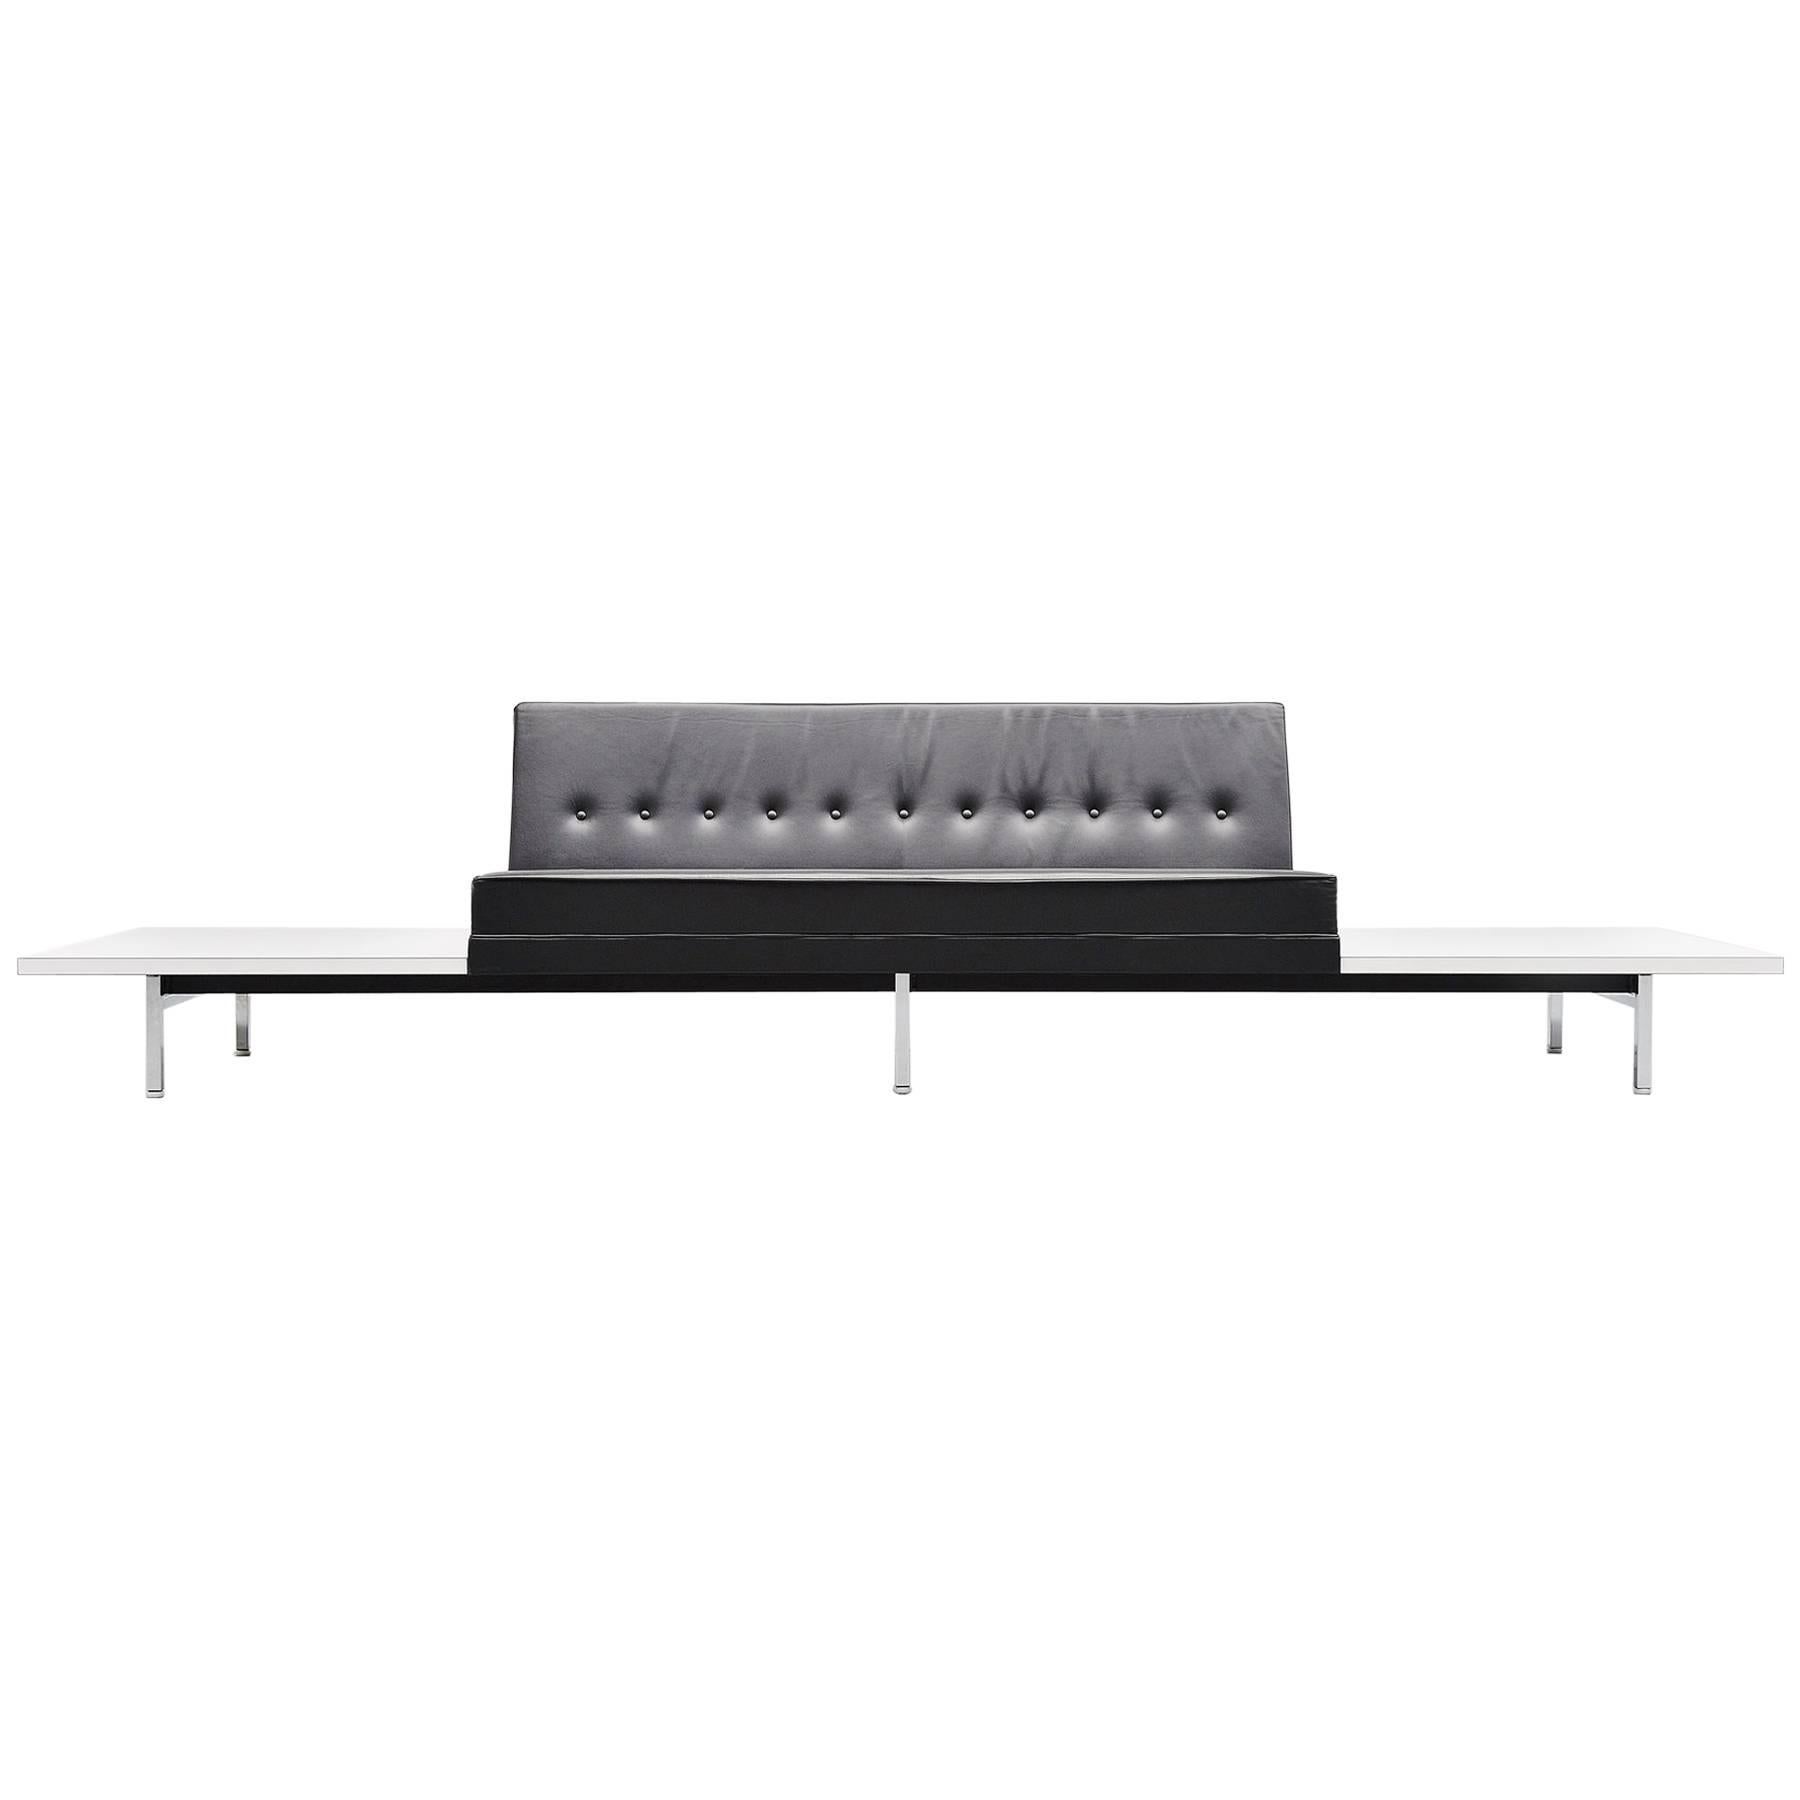 George Nelson Modular Sofa and Tables Herman Miller, 1963